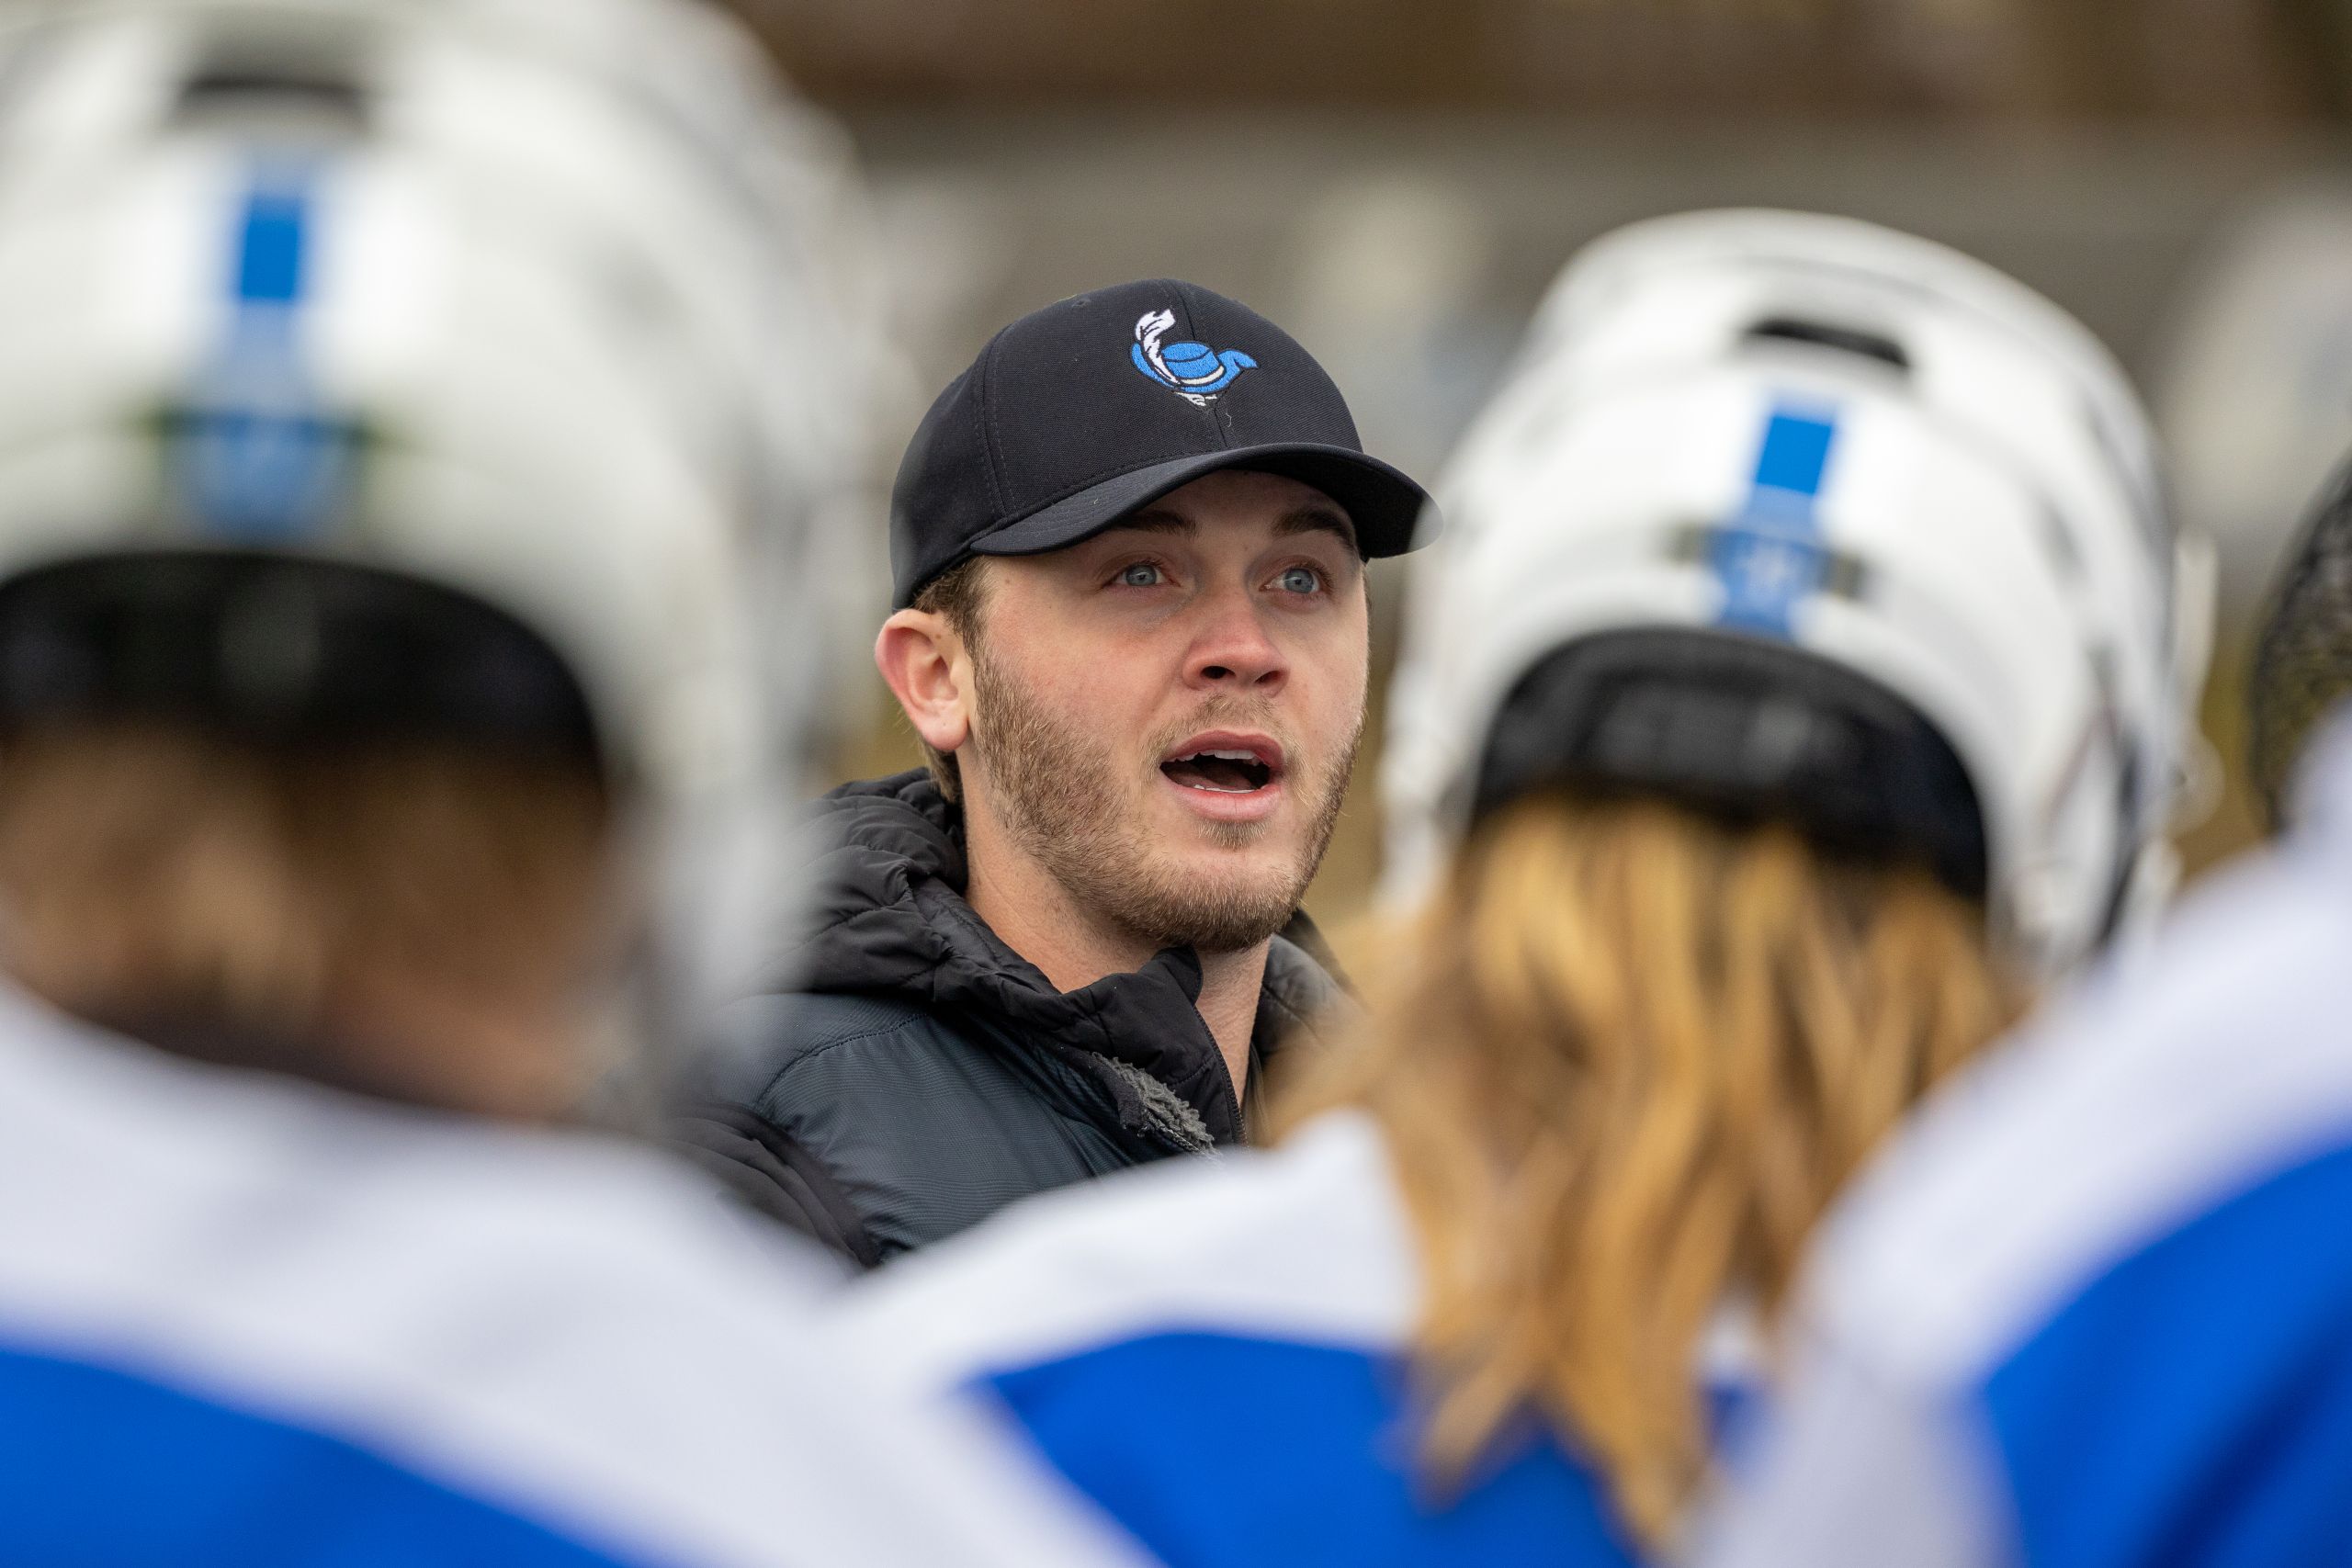 A white man with blond scruffy facial hair wearing a black sweatshirt and a black baseball hat with a logo of a blue cavaliers top hat and a white feather on it. He is placed in between two out of focus members of the lacrosse team both wearinf white helmets and blue jerseys